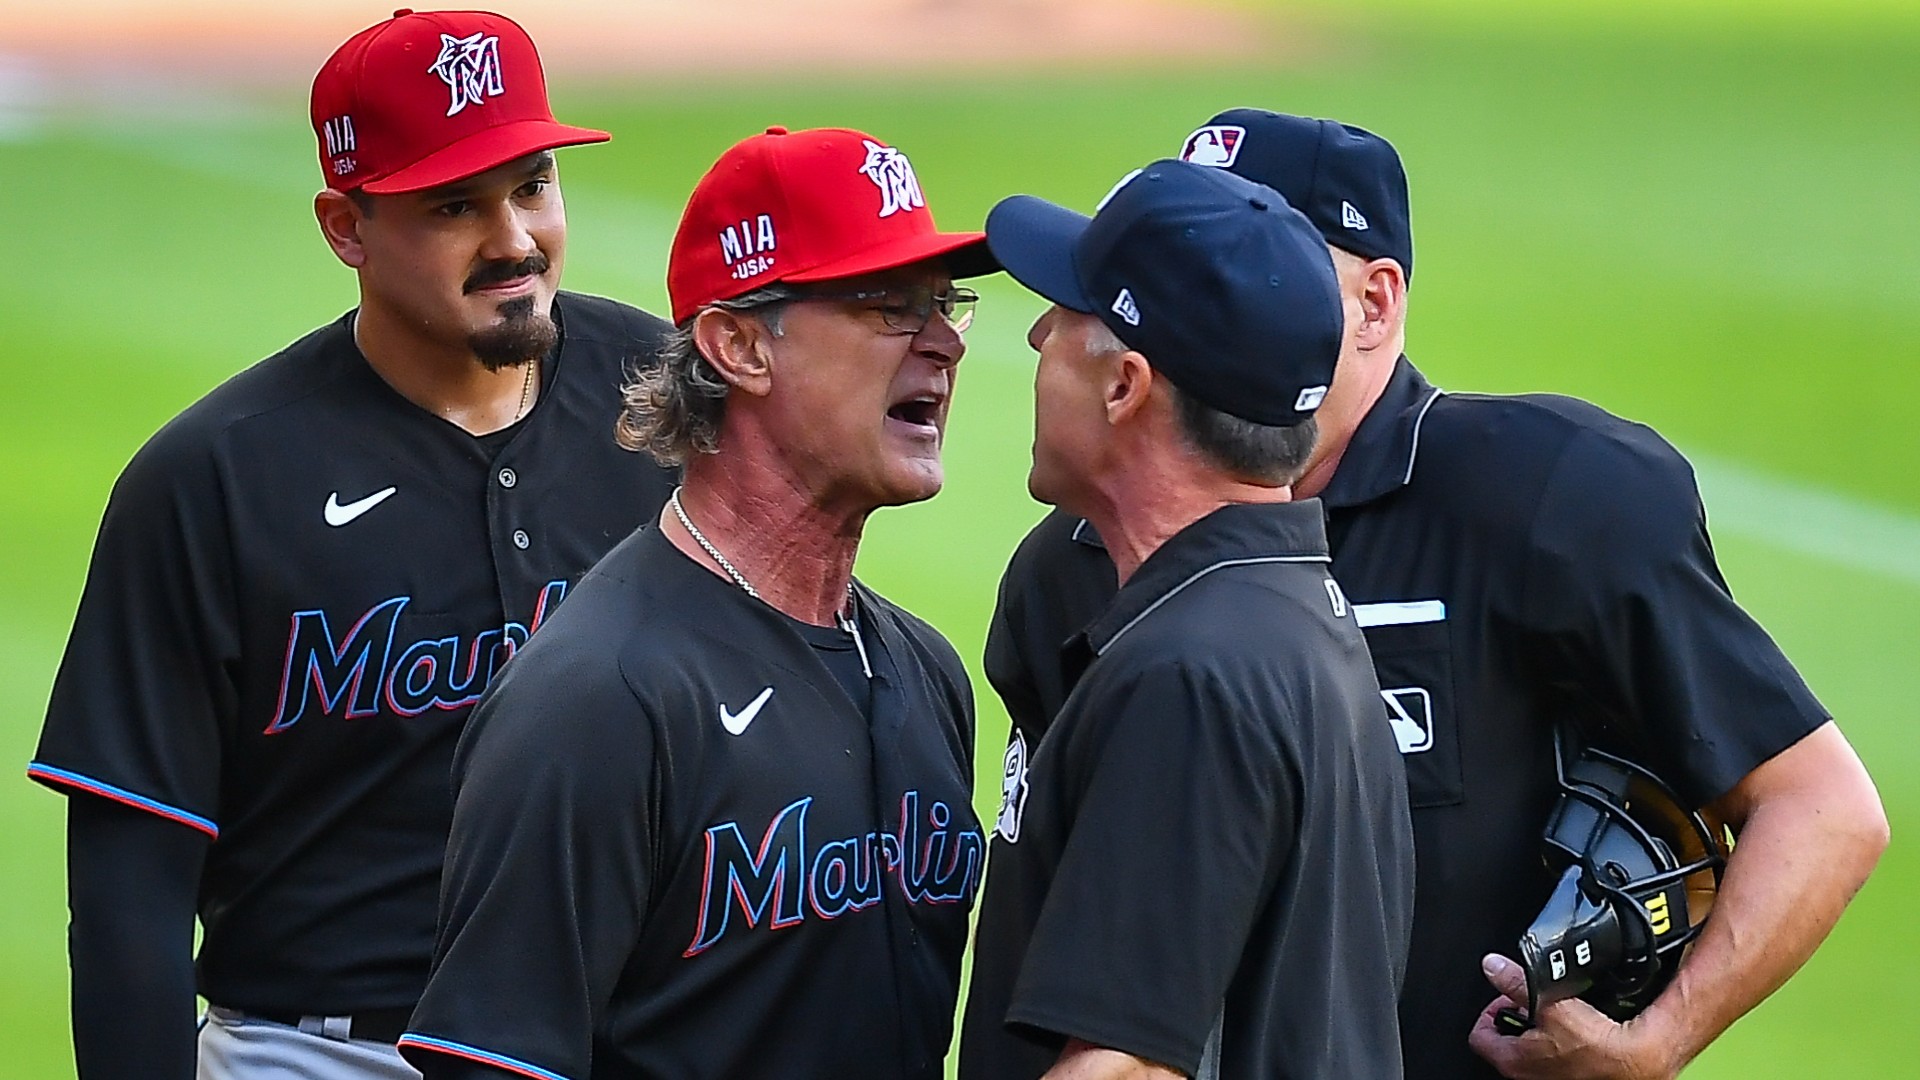 Photo of Don Martinly of the Marlins: Upps was “bullyed” to oust Pablo Lopez for hitting Ronald Acuna Jr.